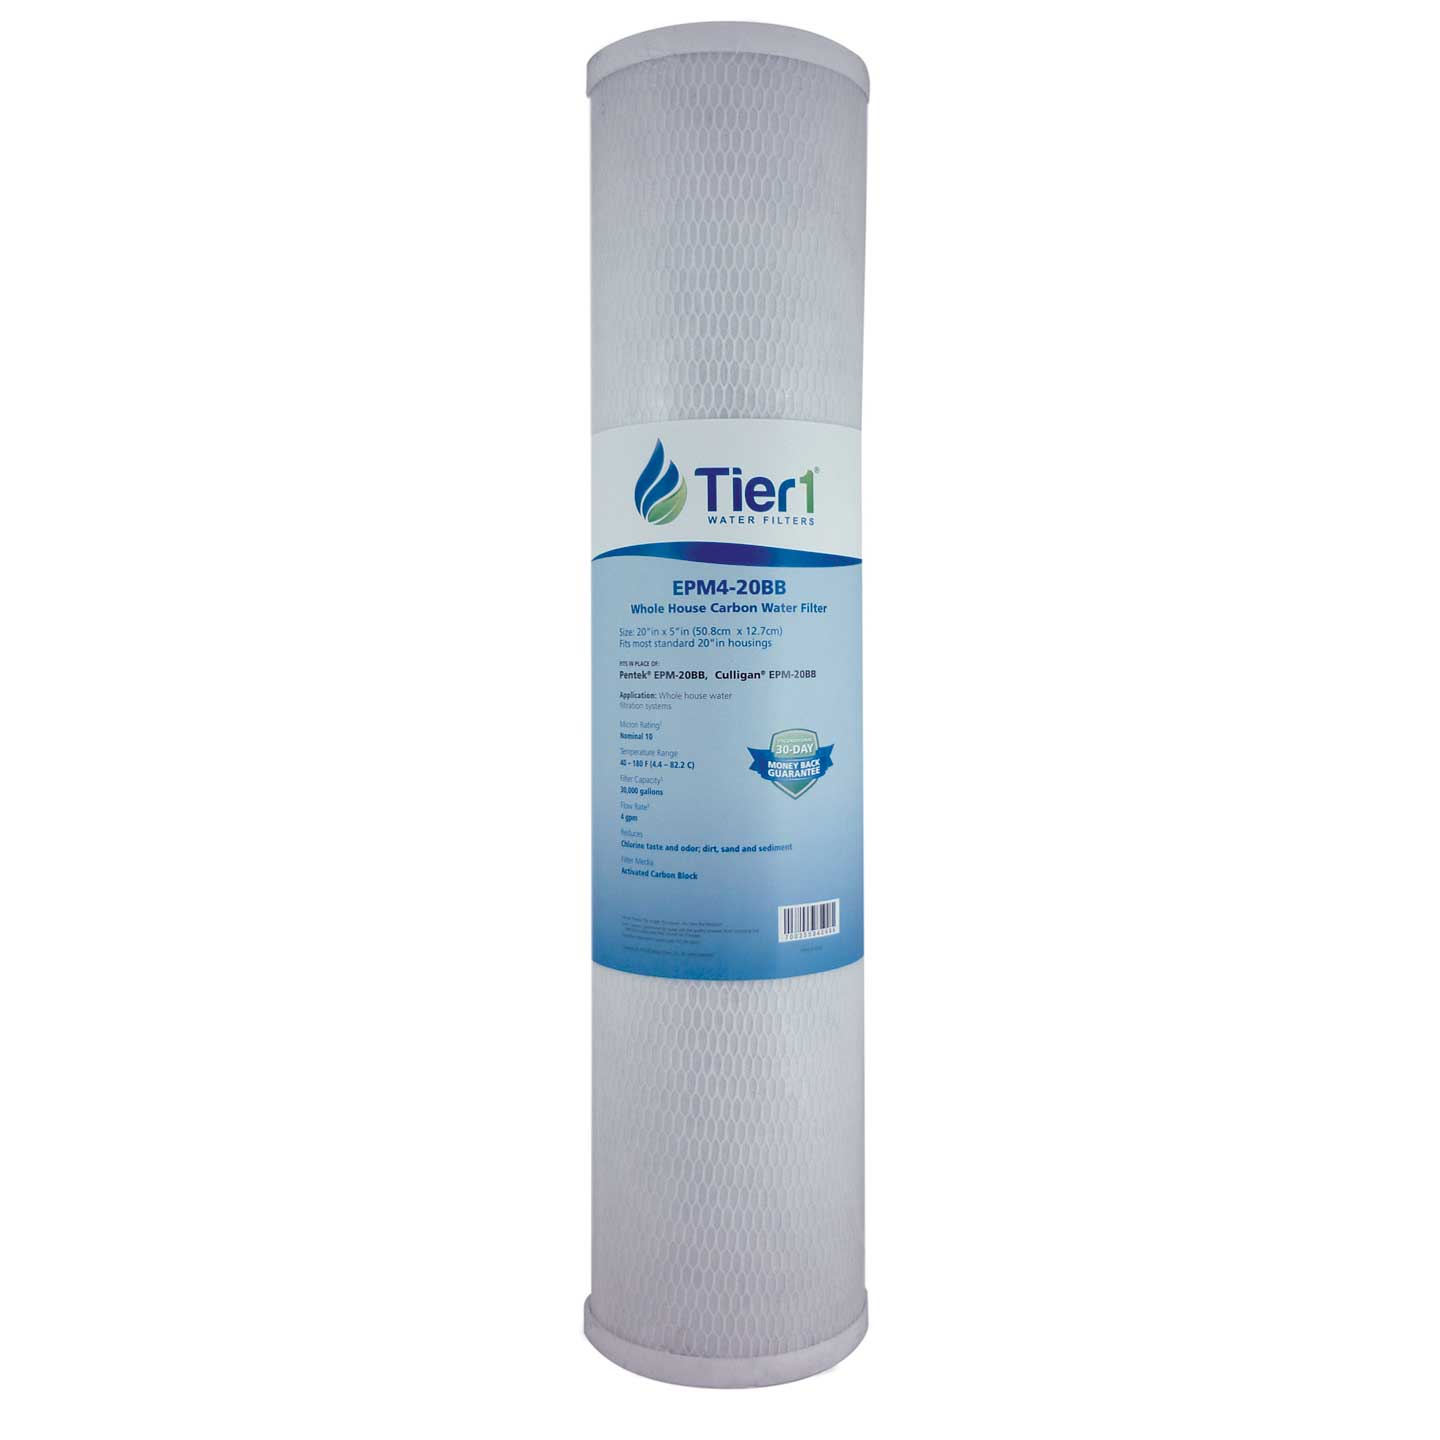 20 X 4.5 Carbon Block Replacement Filter by Tier1 (10 micron)